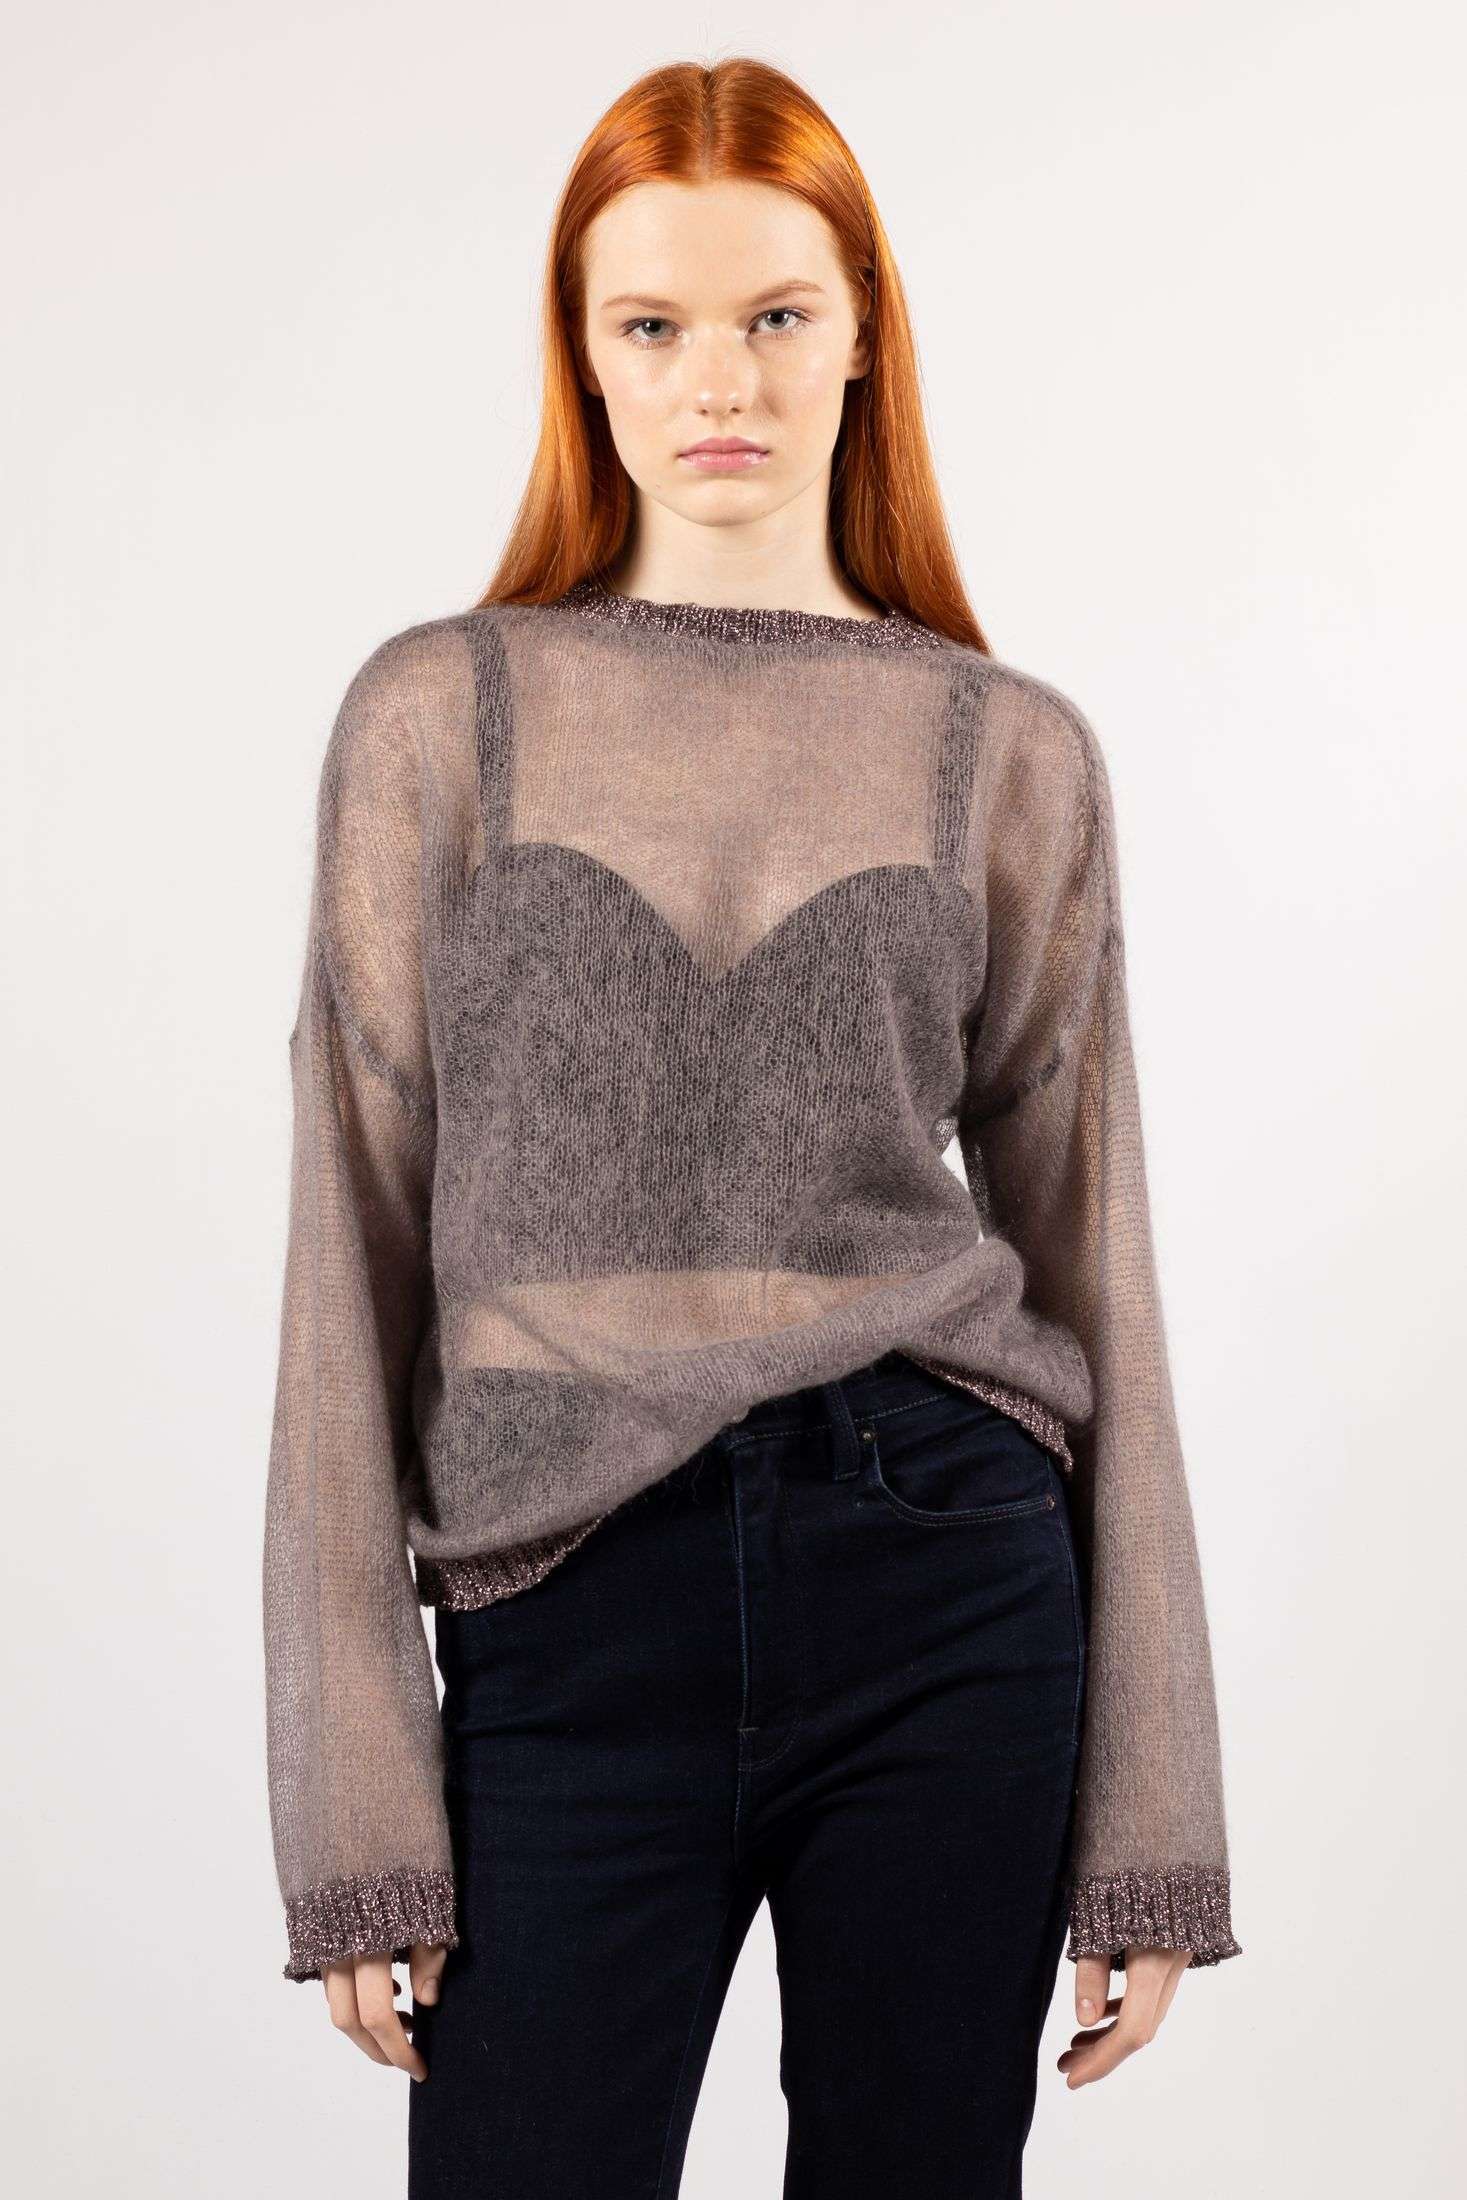 Luna: Make a statement in the chilly season with this brown sweater—transparent knit allure.